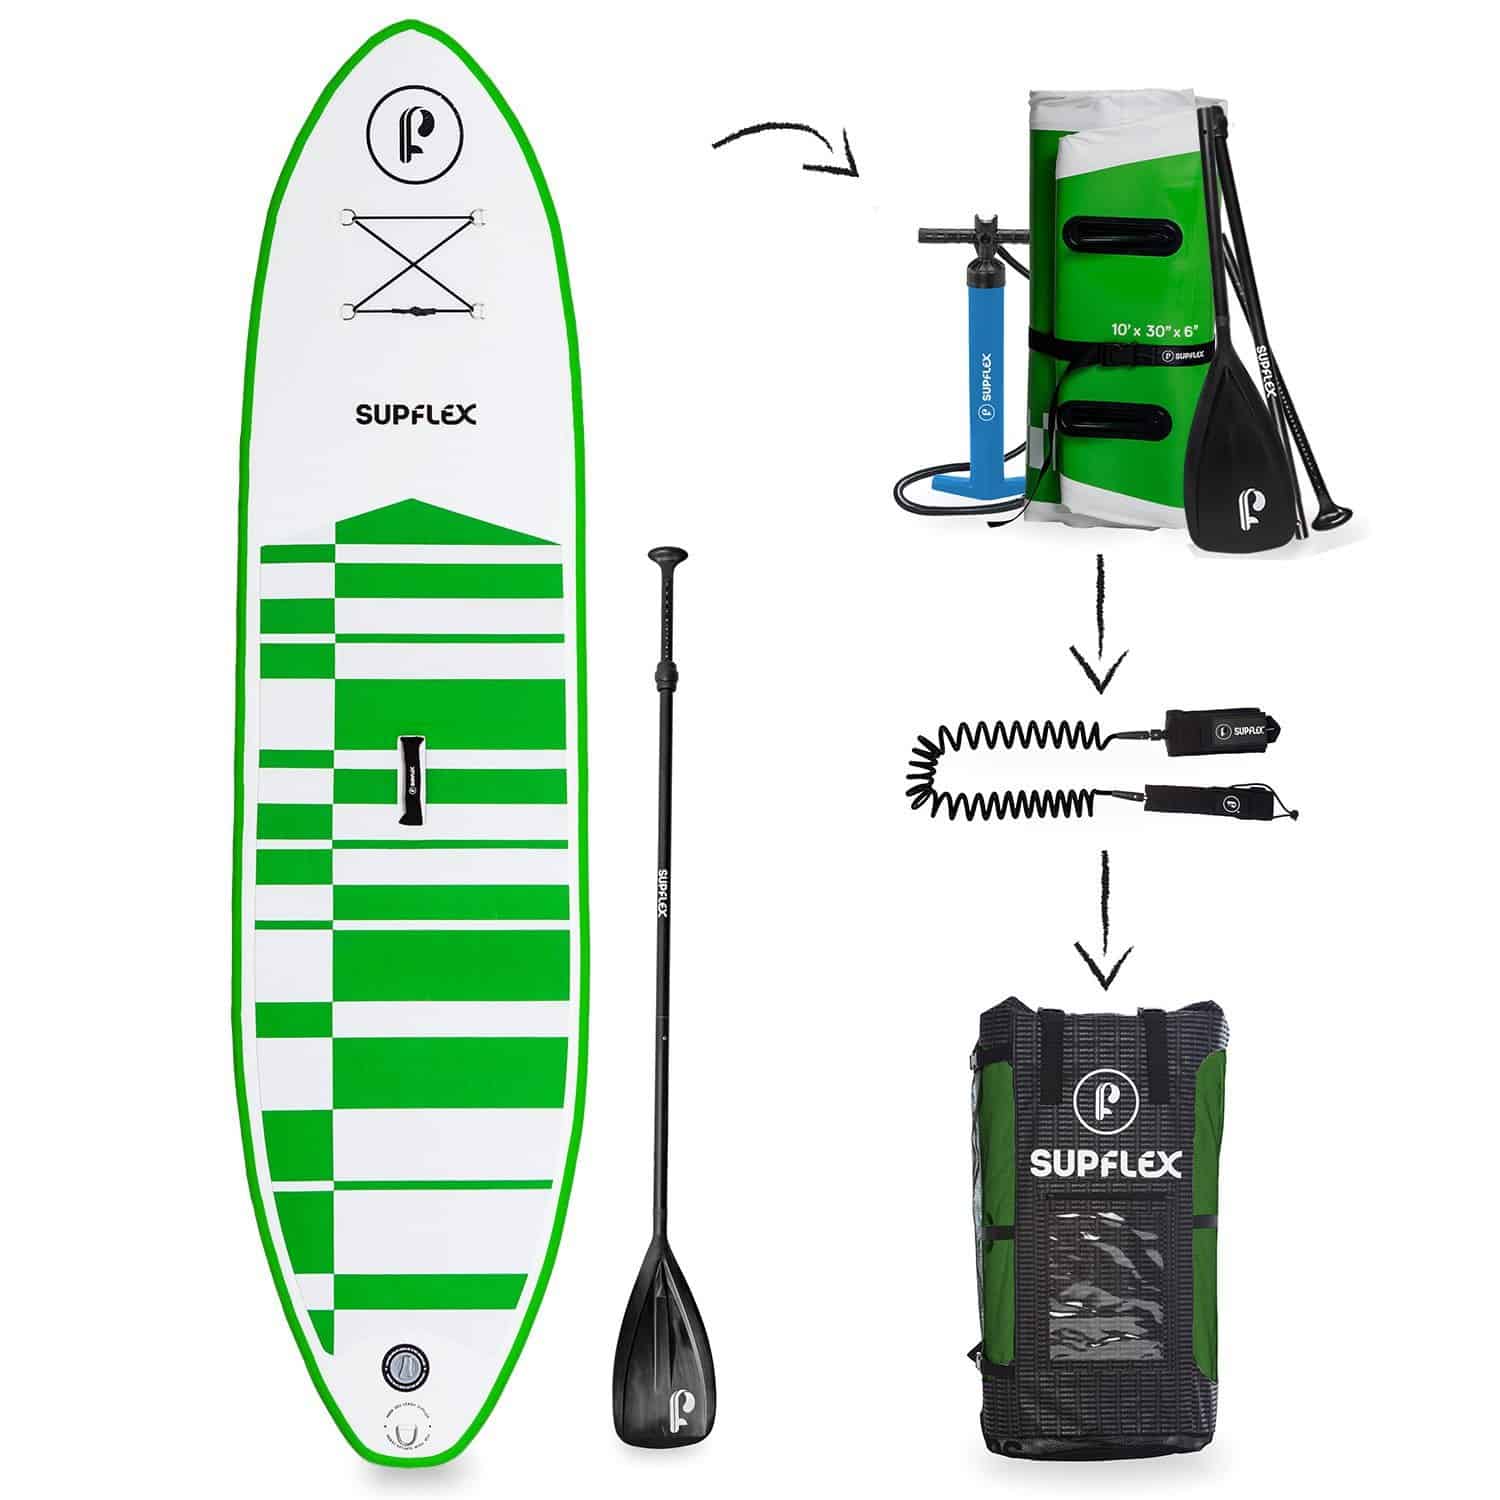 a picture of a Supflex inflatable paddle board